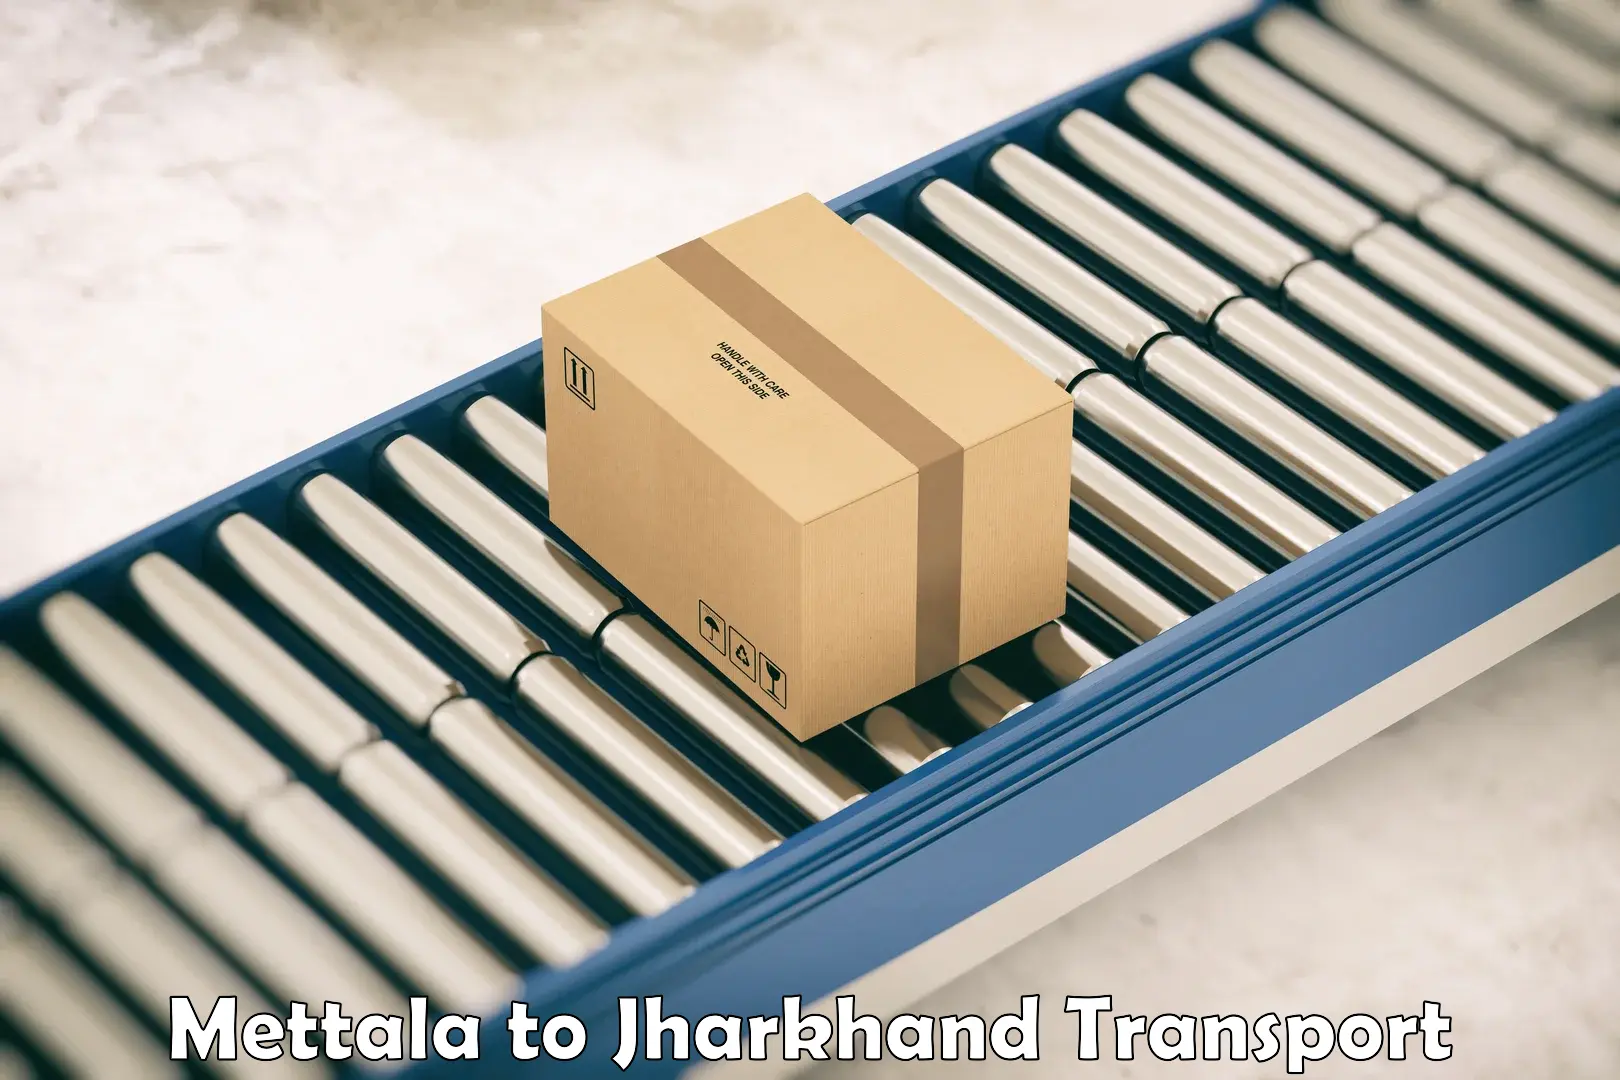 Part load transport service in India Mettala to Jamshedpur